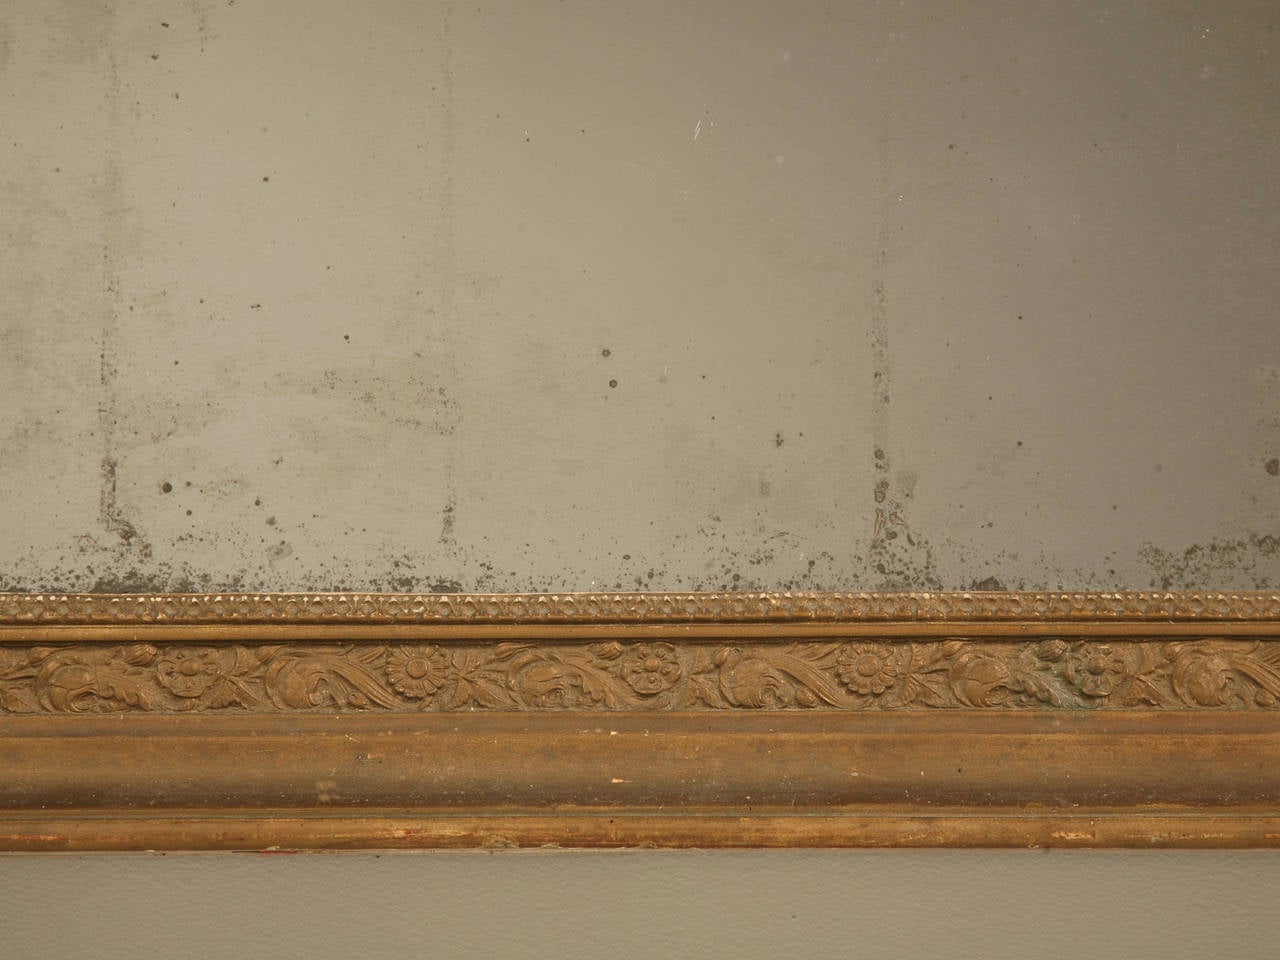 Wood French Mirror with Original Glass, circa 1800s